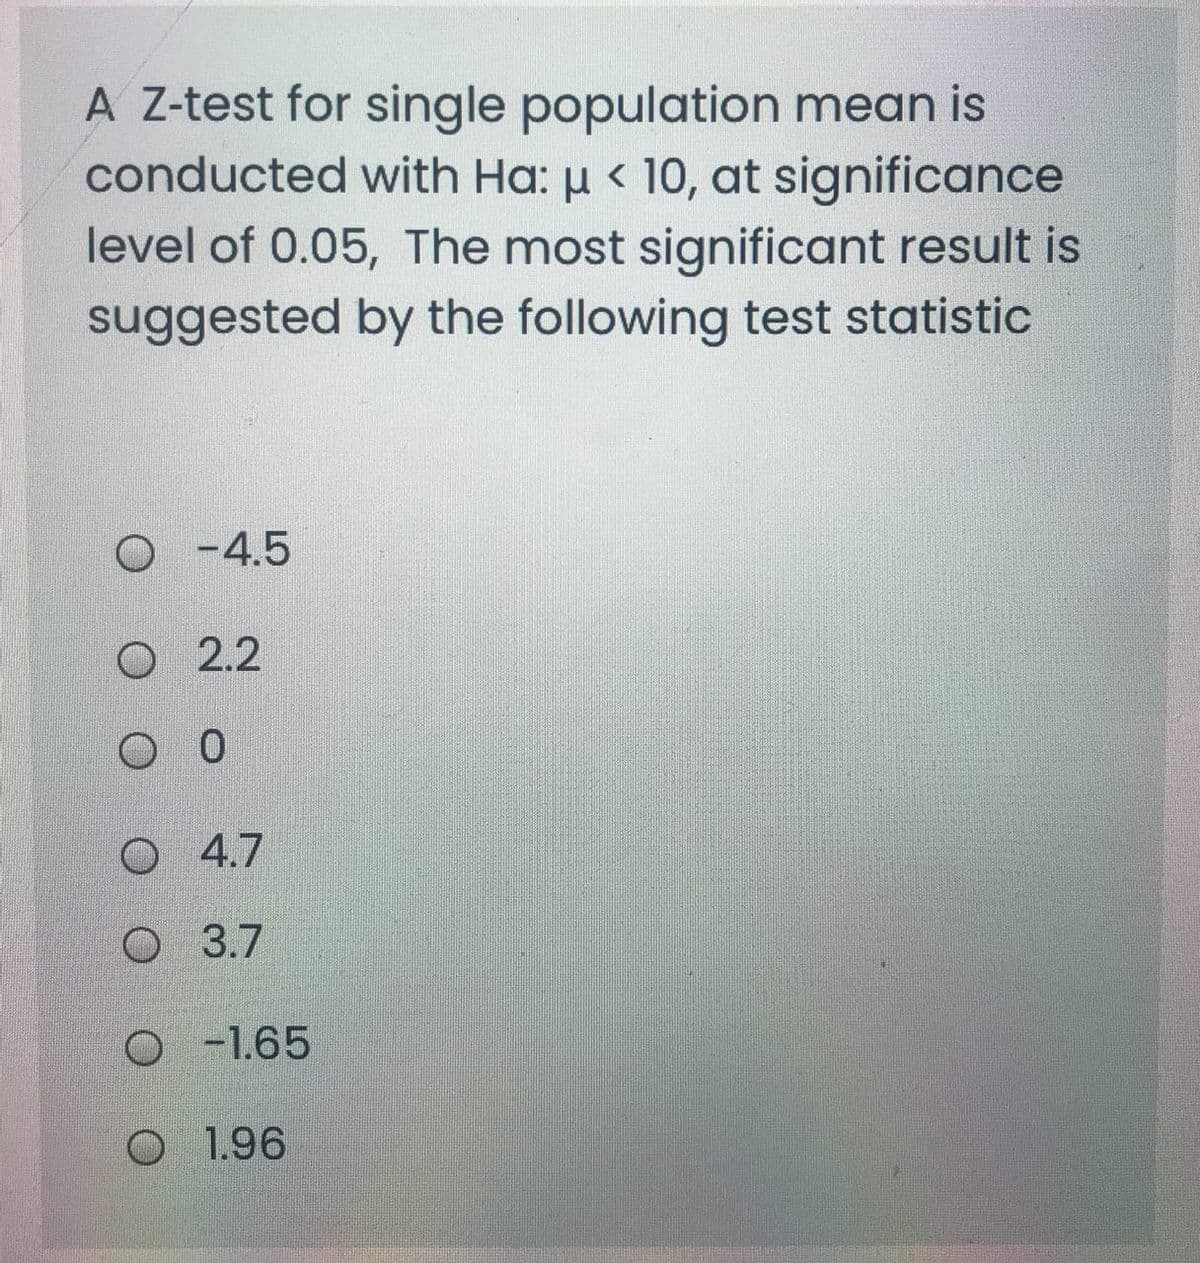 A Z-test for single population mean is
conducted with Ha: µ < 10, at significance
level of 0.05, The most significant result is
suggested by the following test statistic
O -4.5
O 2.2
O 4.7
O 3.7
O -1.65
1.96
